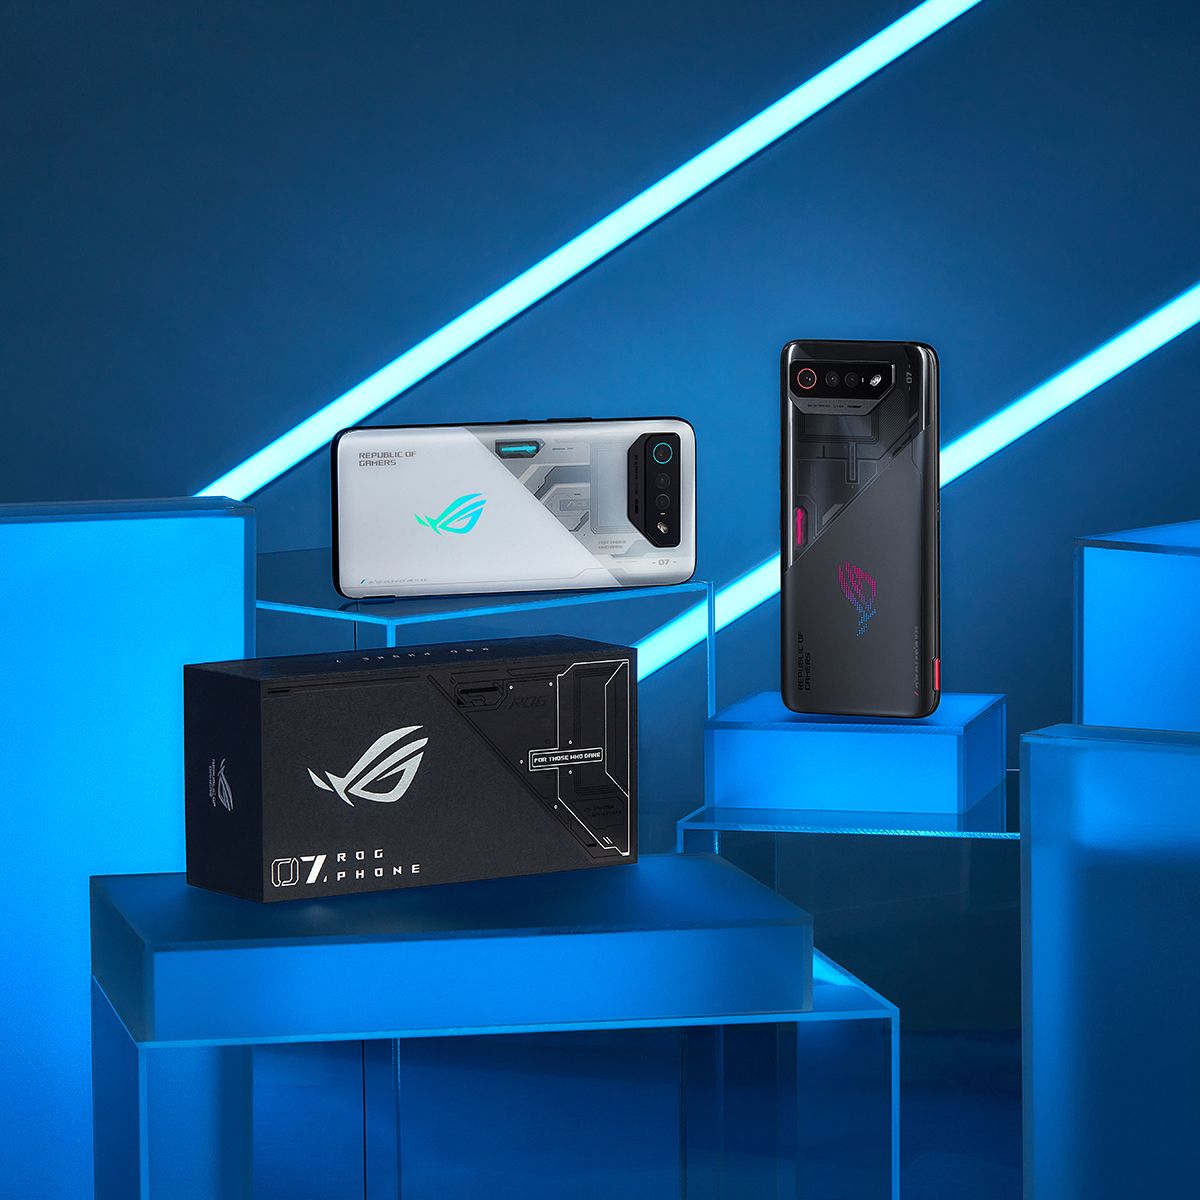 Asus Rog Phone 7 series in black and white with product box in the foreground